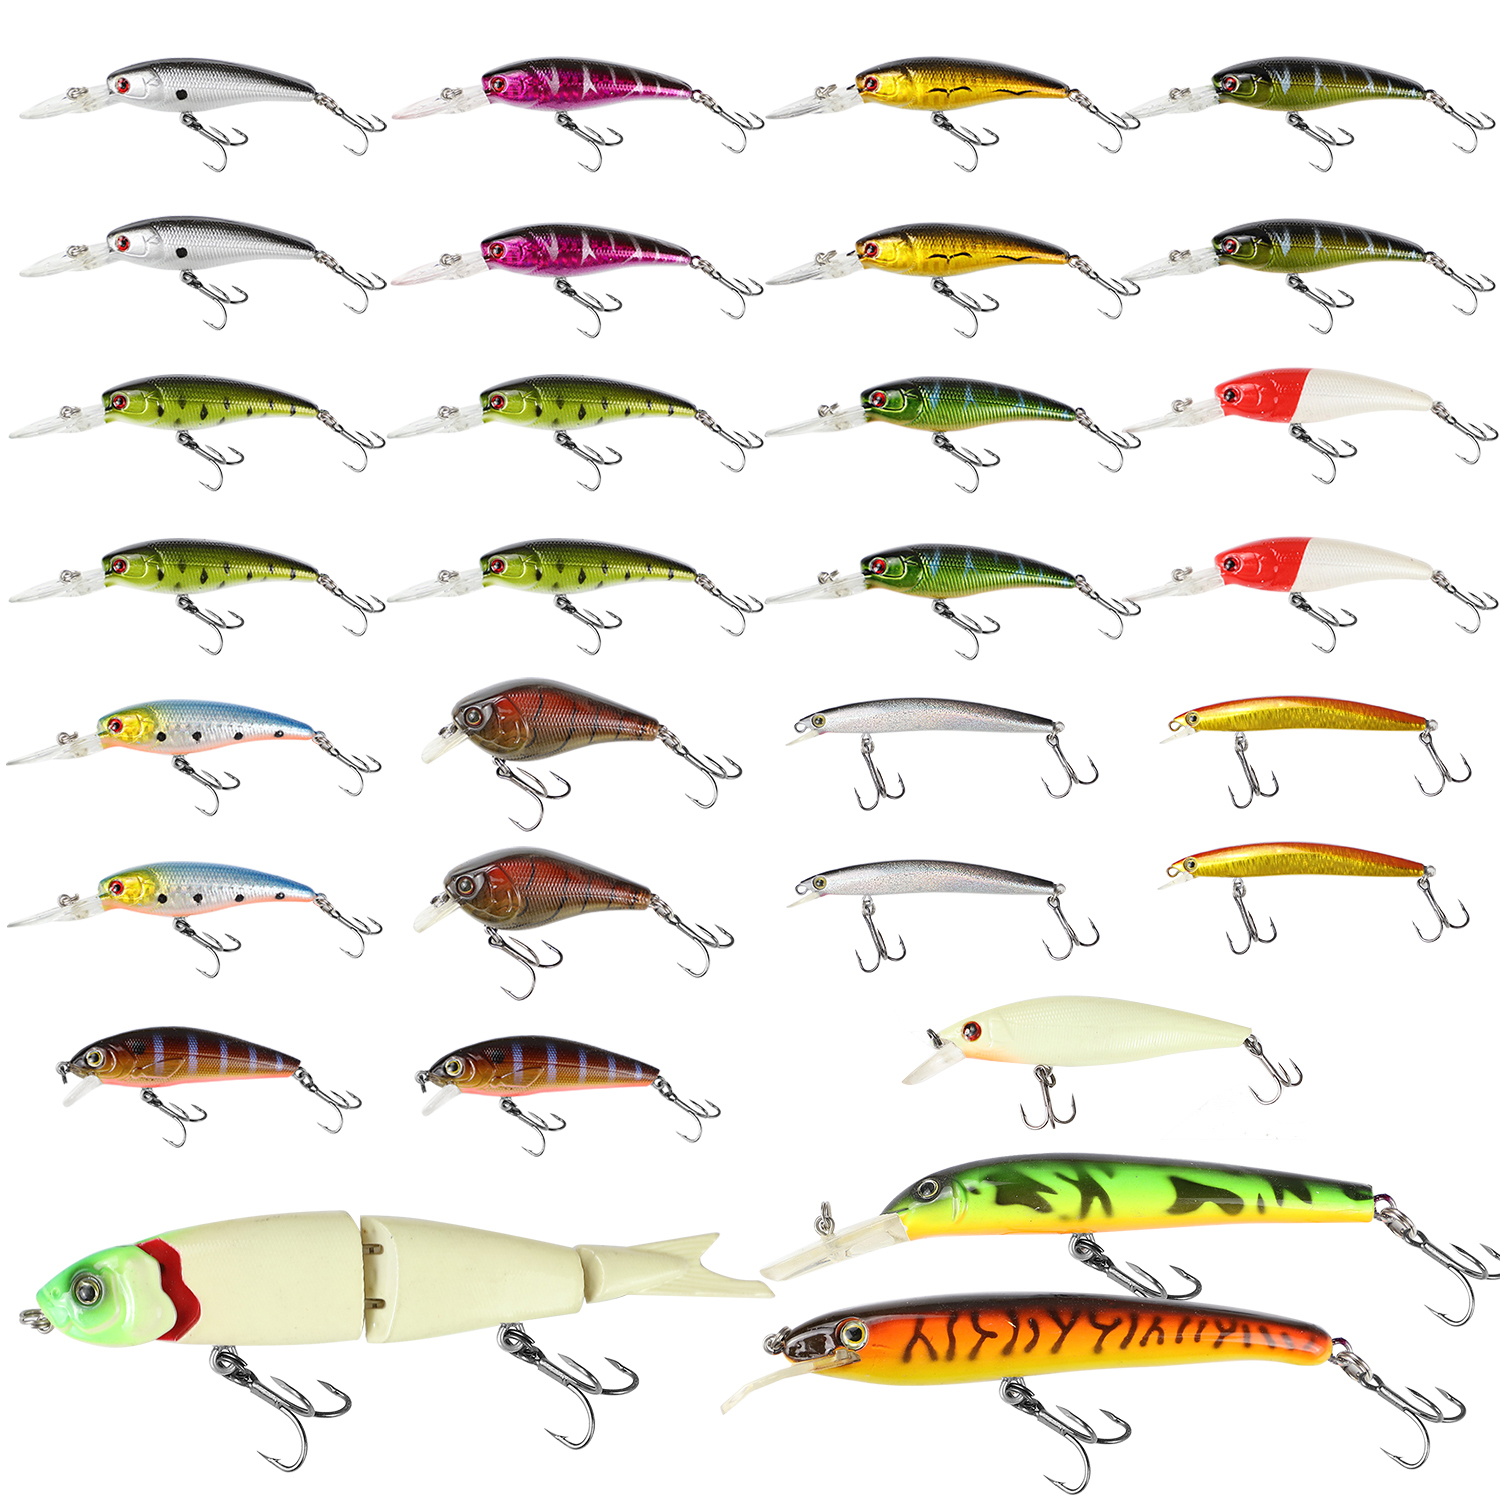 FREE FISHER 30pcs Mixed Fishing Hard Lures Set 6.5cm-17.5cm Colorful Topwater Minnows with Treble Hook for Bass Trout Walleye Redfish